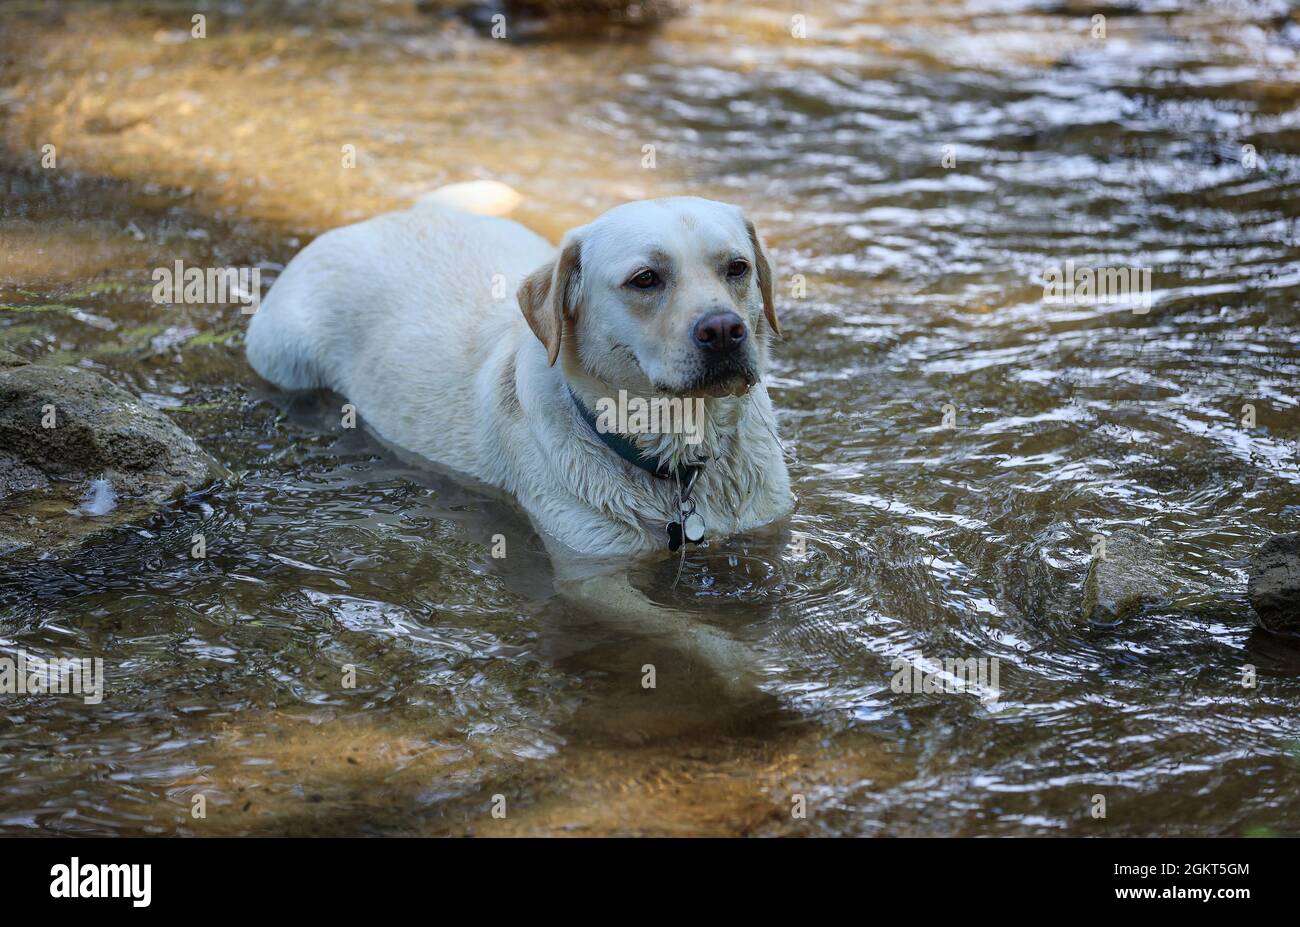 A golden labador lays in shallow water of a creeek to cool off from the summer heat. Stock Photo